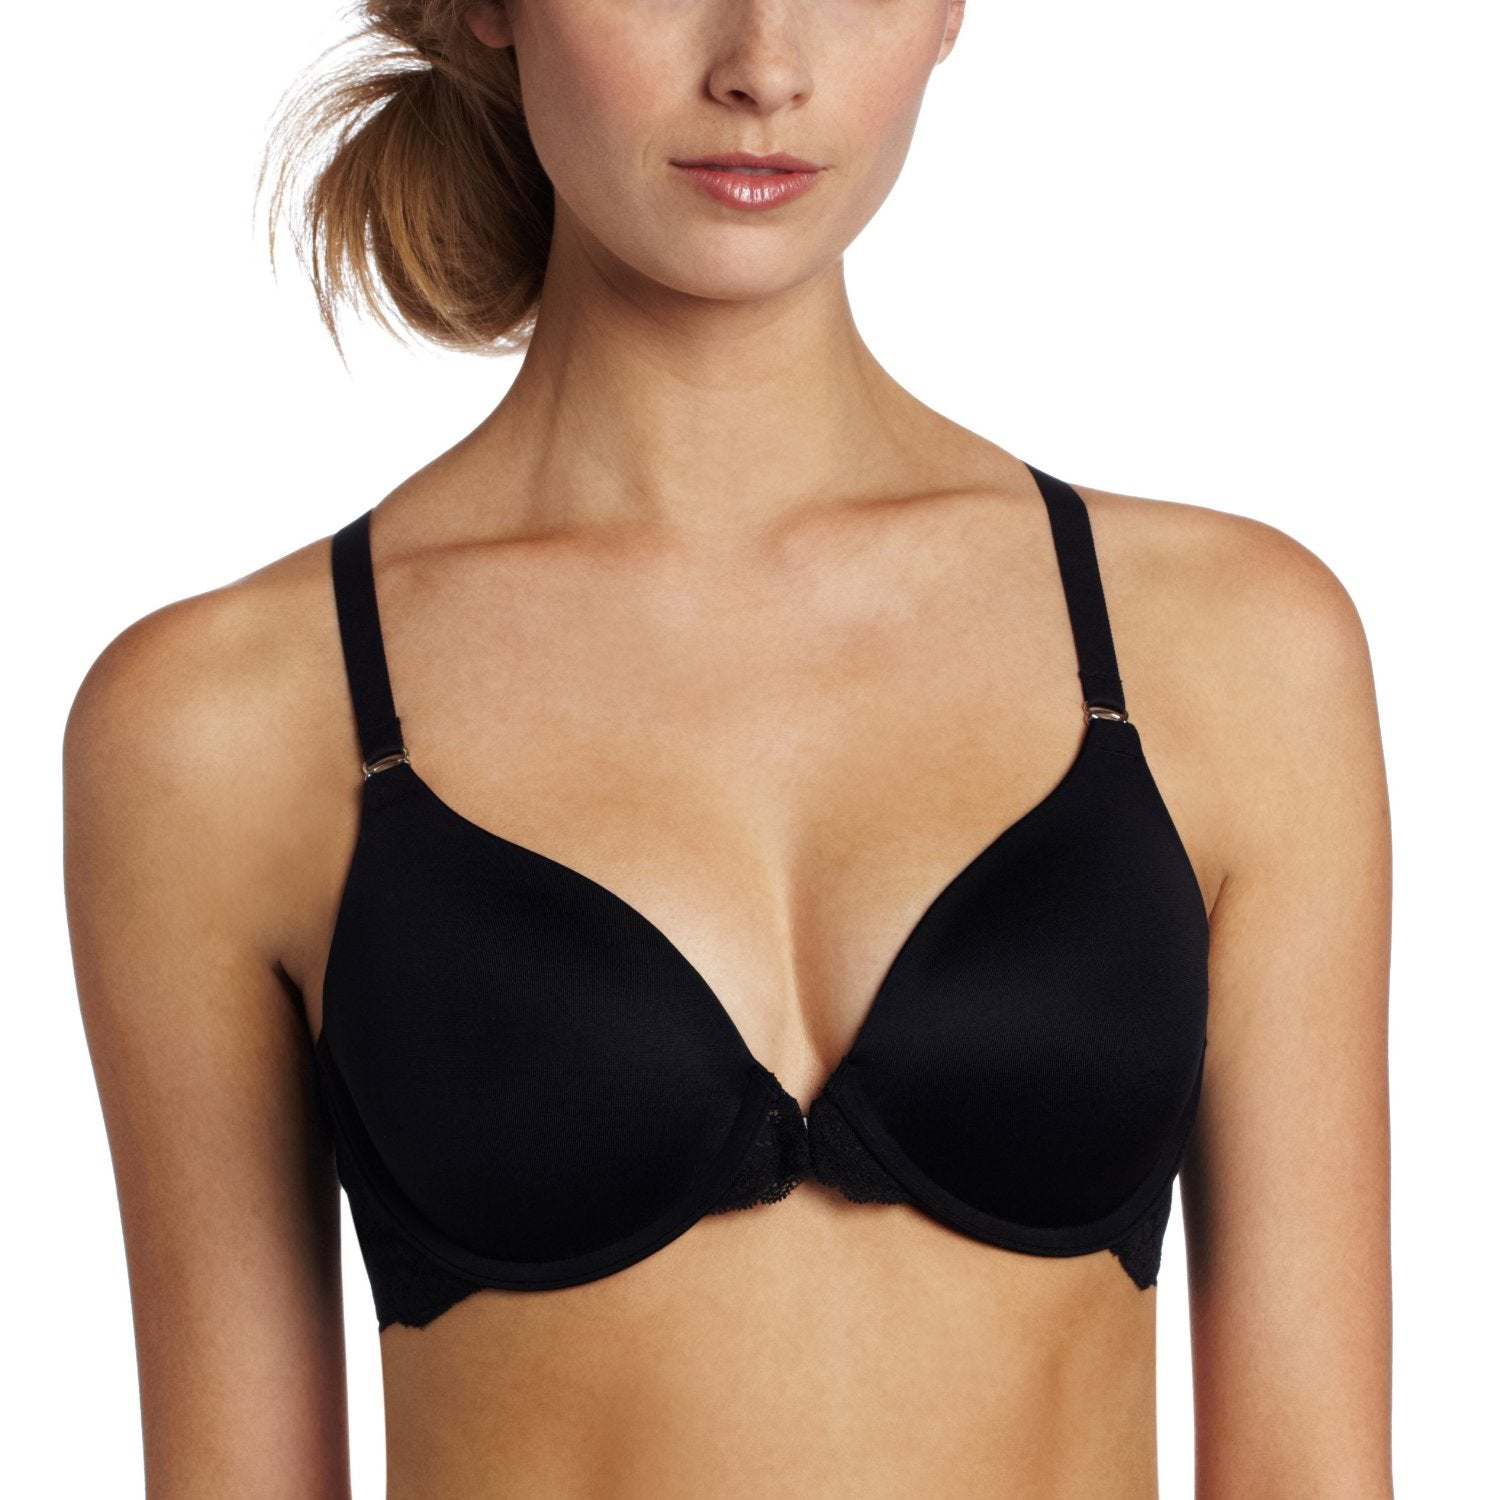 PANOEGSN Women's Cute Bralettes Front Closure Full Coverage